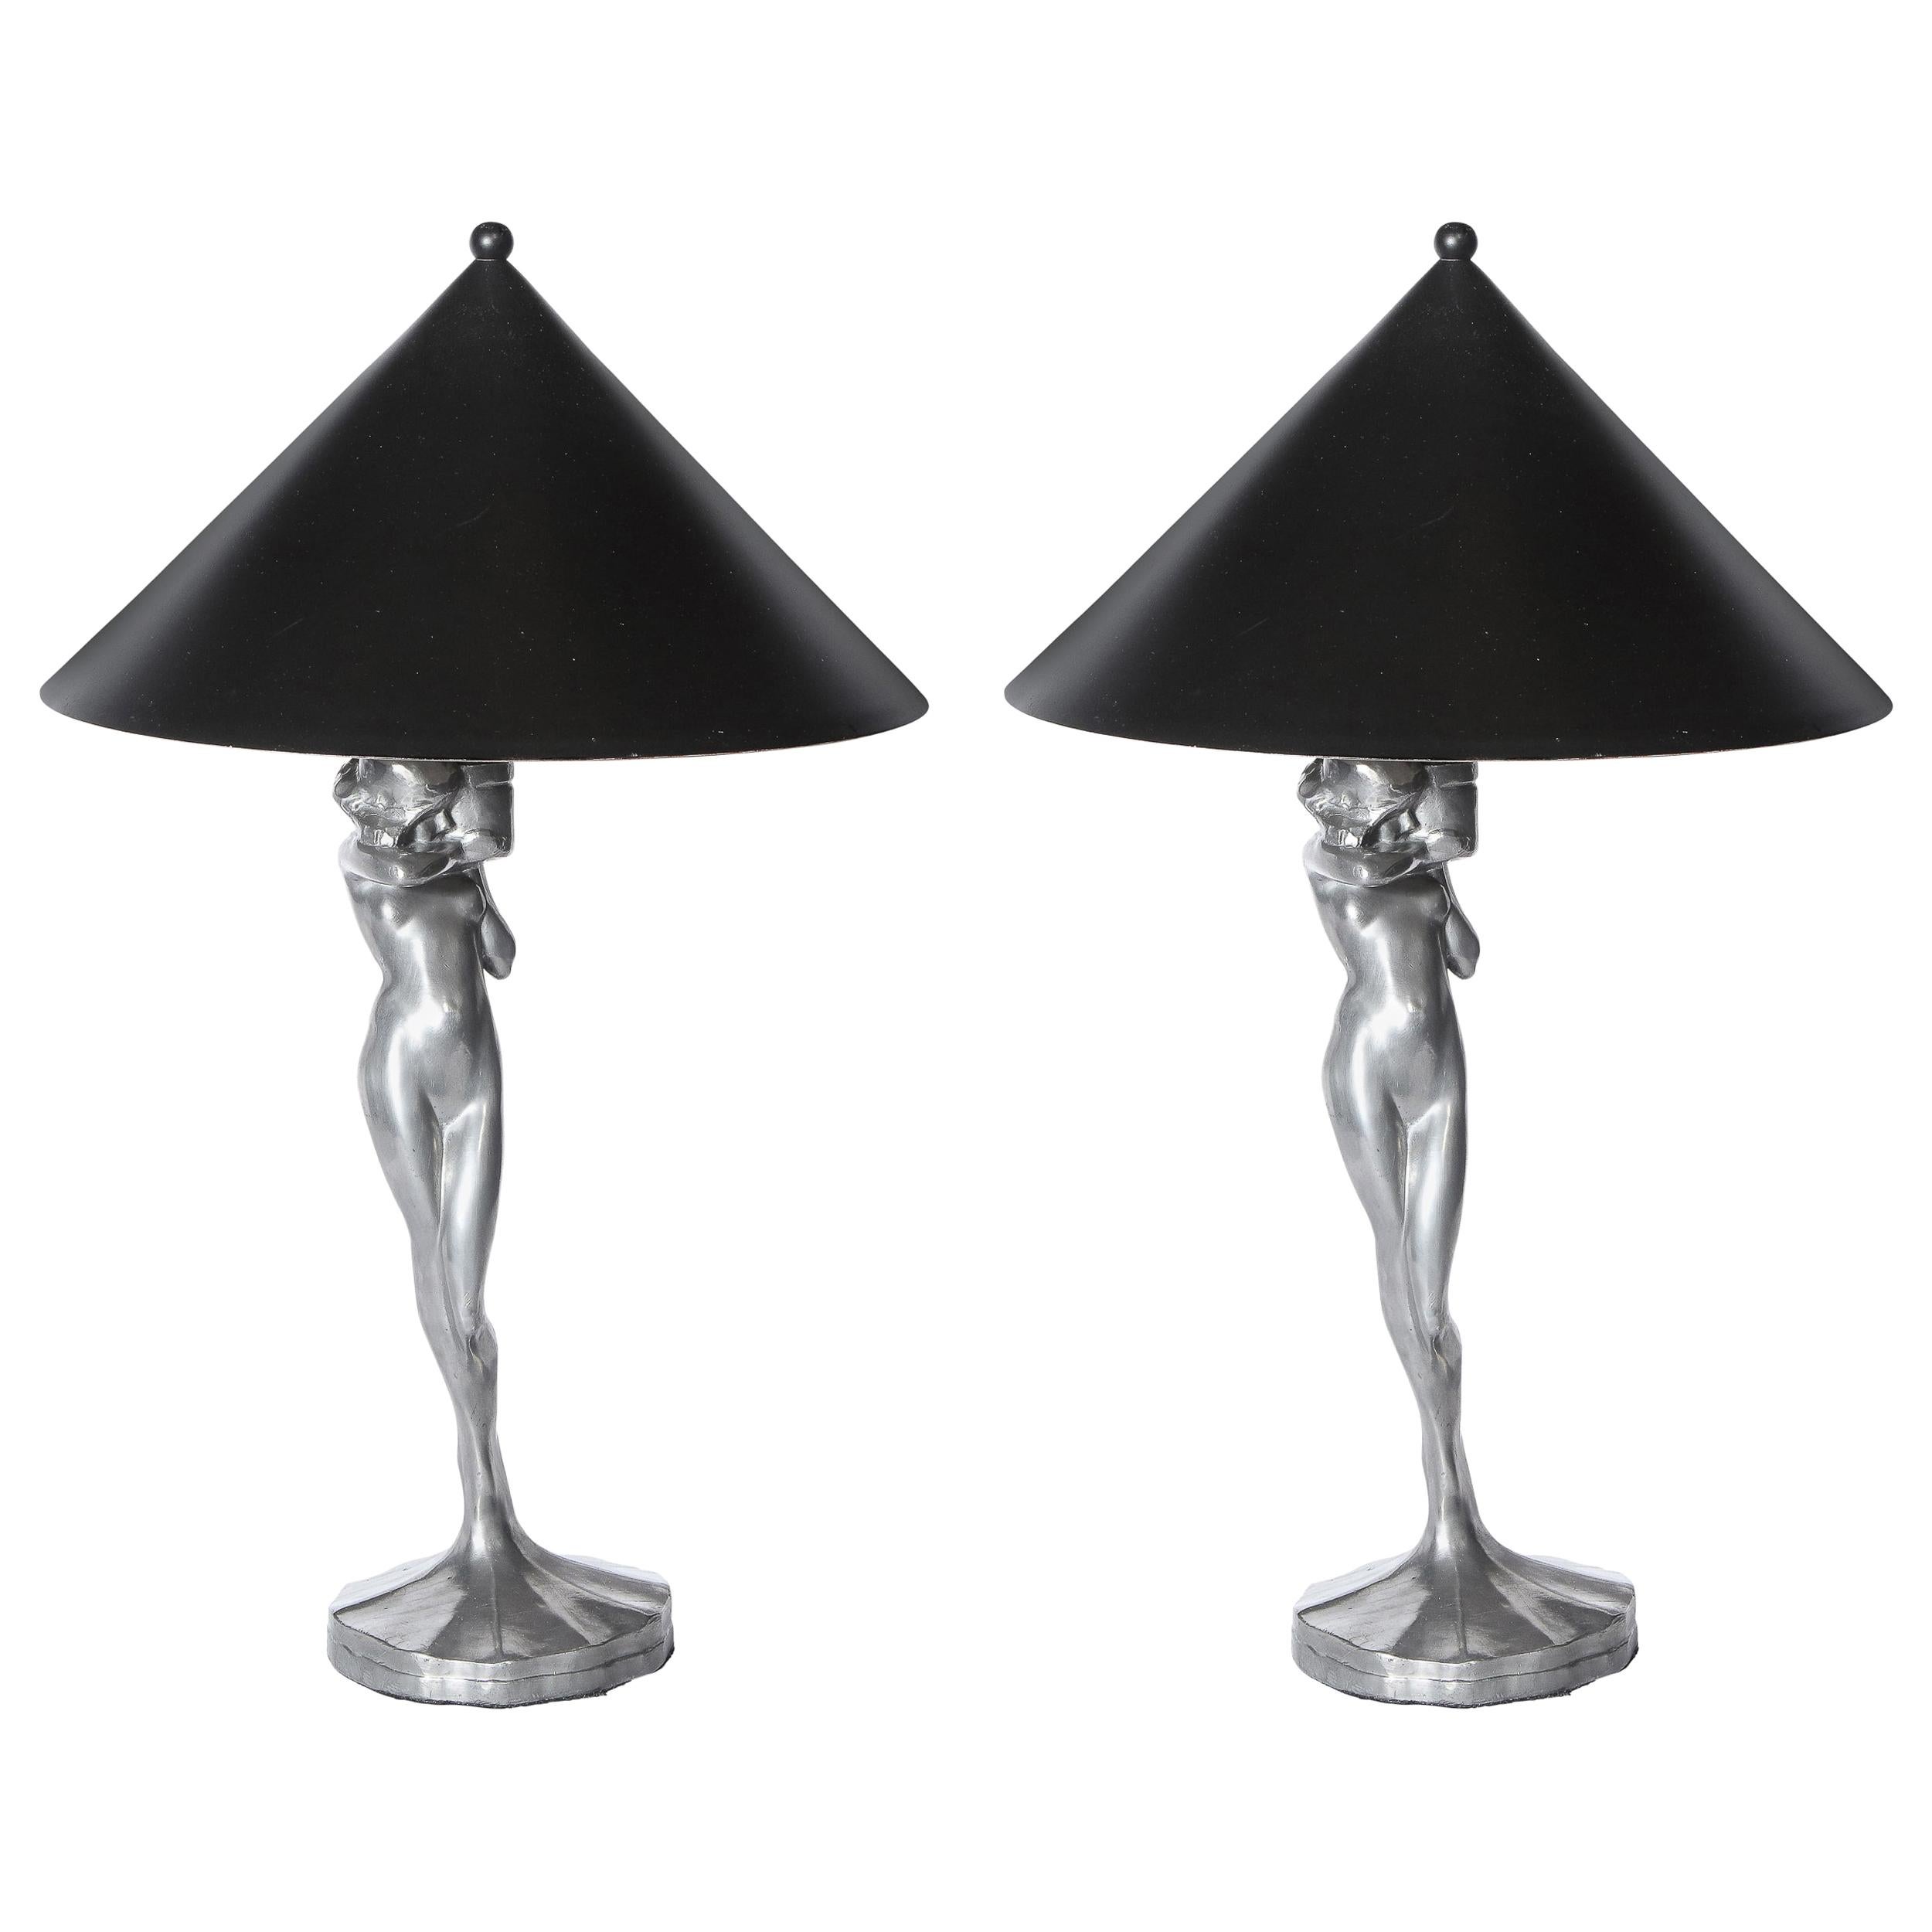 Pair of Art Deco Silvered Bronze Stylized Female Table Lamps by Frankart